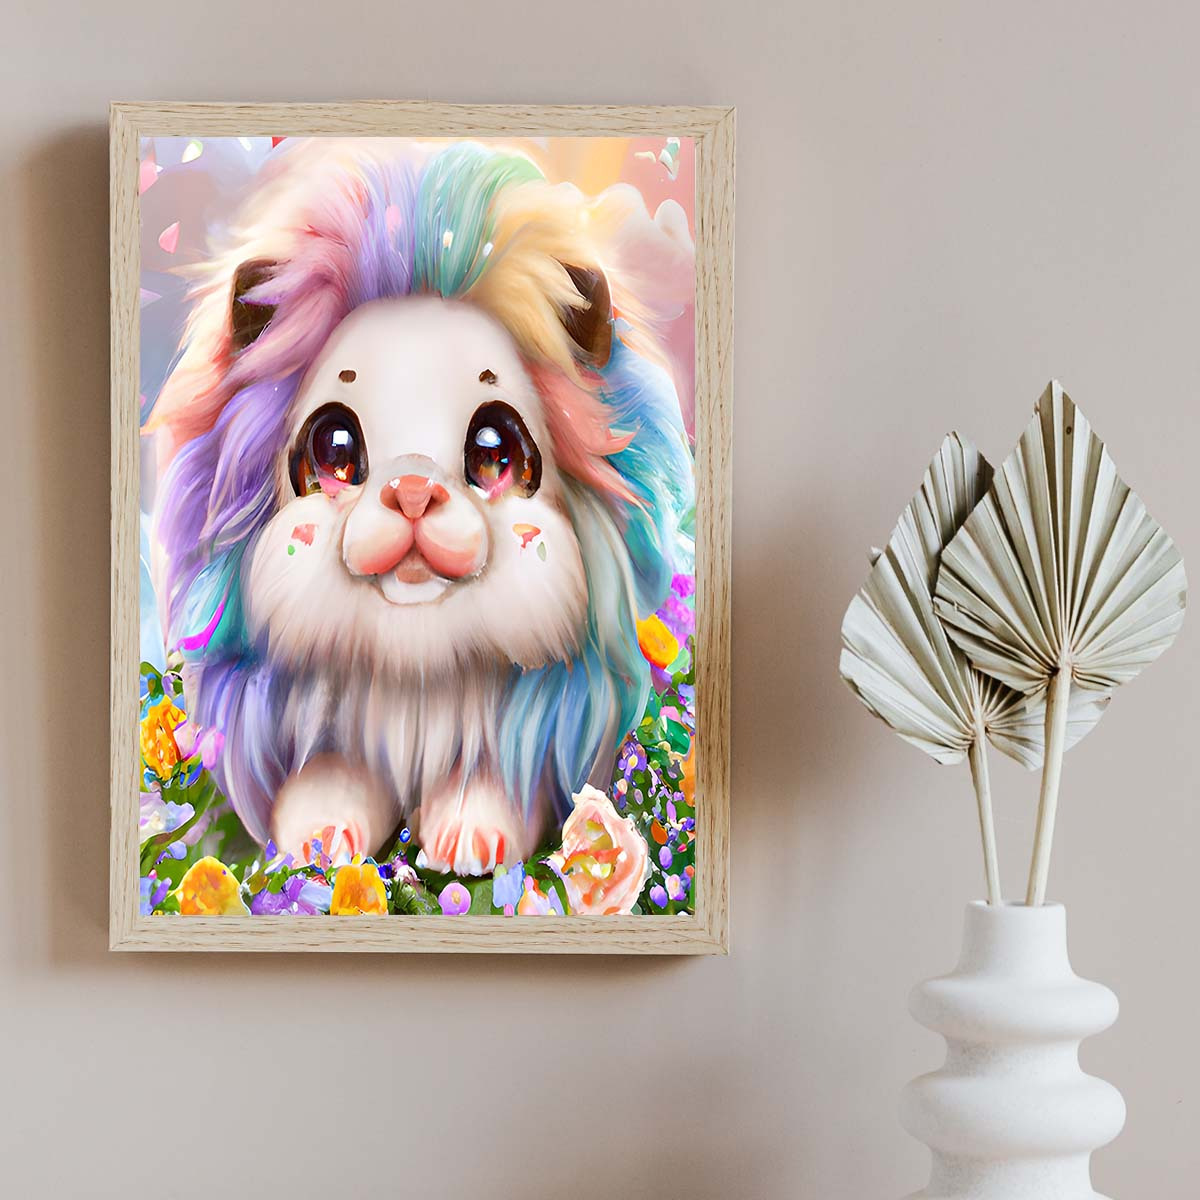 1pc 5D Diamond Painting Kits For Adults, Cow Cute Animal Diamond Painting  DIY Diamond Art Kit Round Full Drill Art Picture For Home Wall Decor,20x20cm